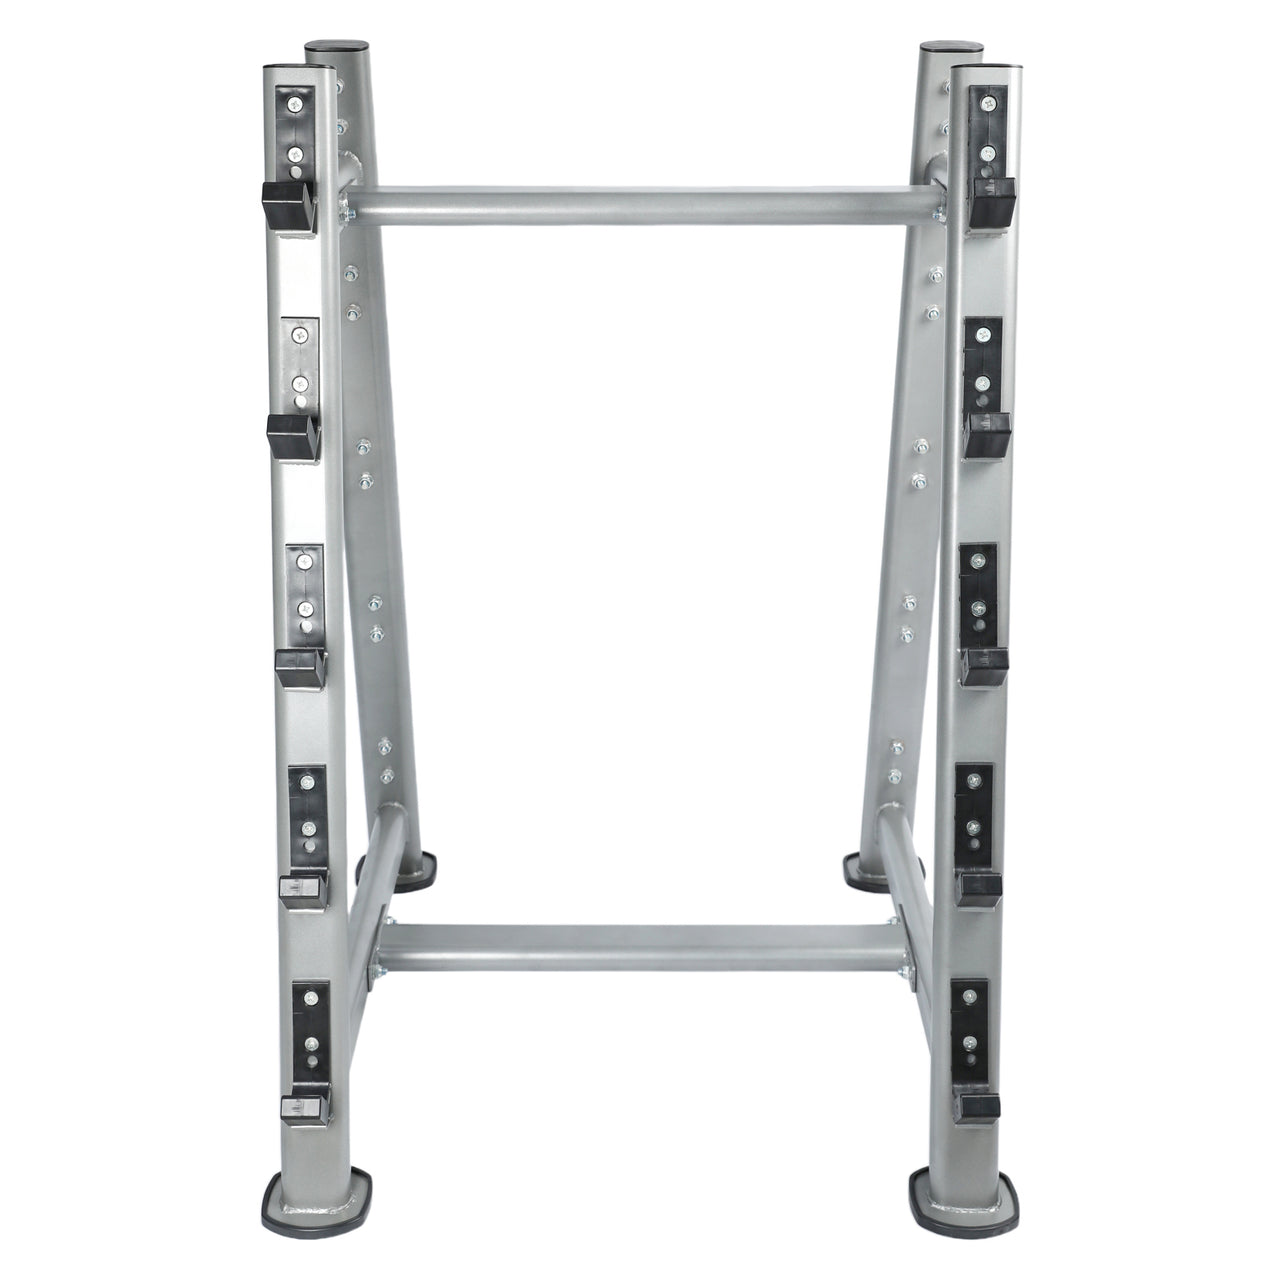 1441 Fitness Barbell Rack for 10 Piece - BR08